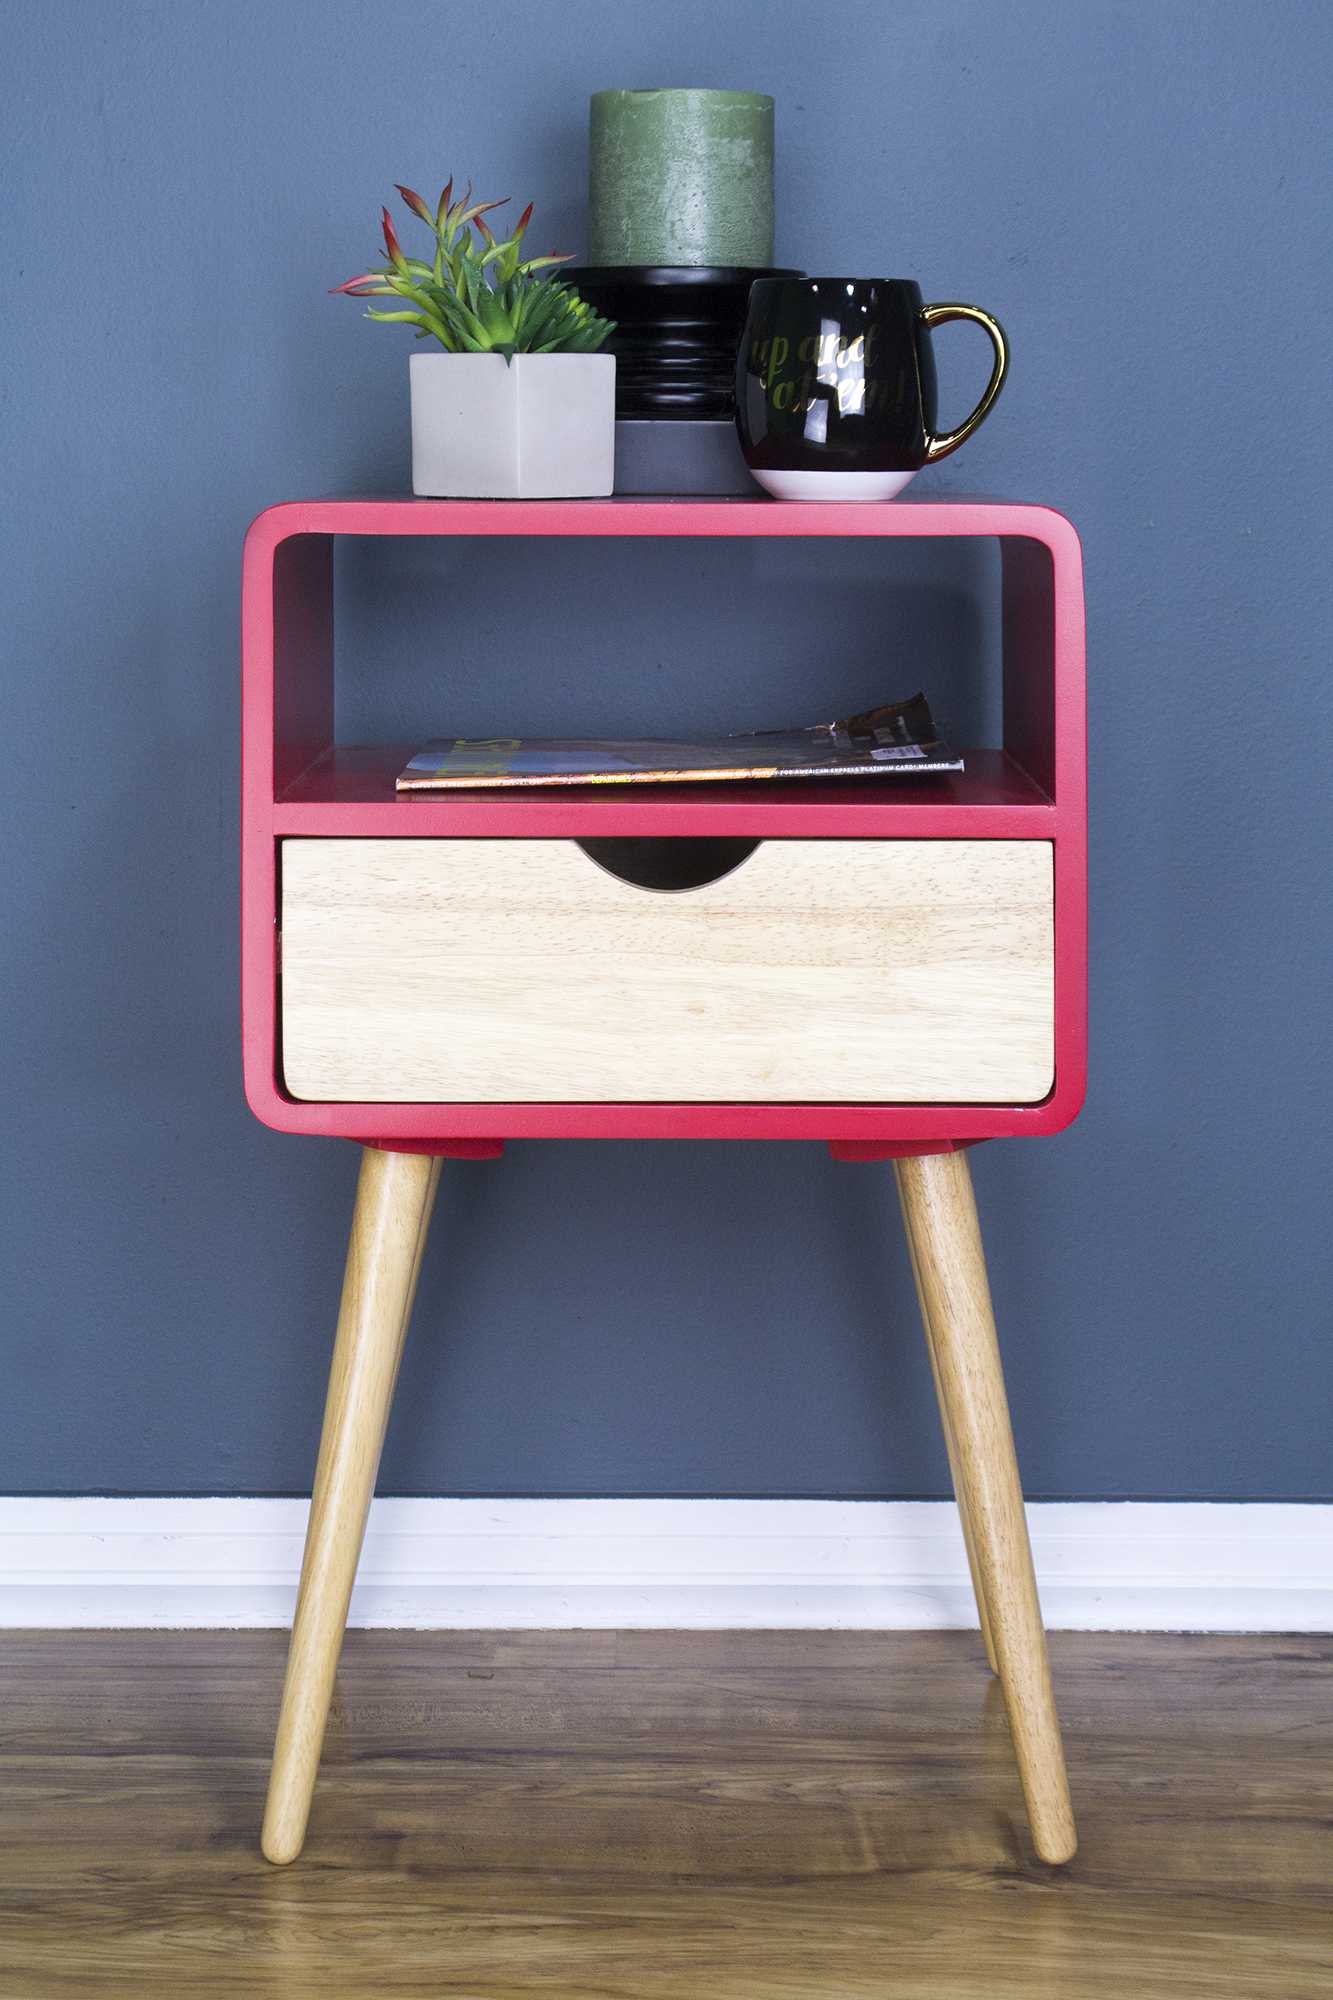 16" X 12" X 26" Red MDF Wood End Table with Drawer and Shelf